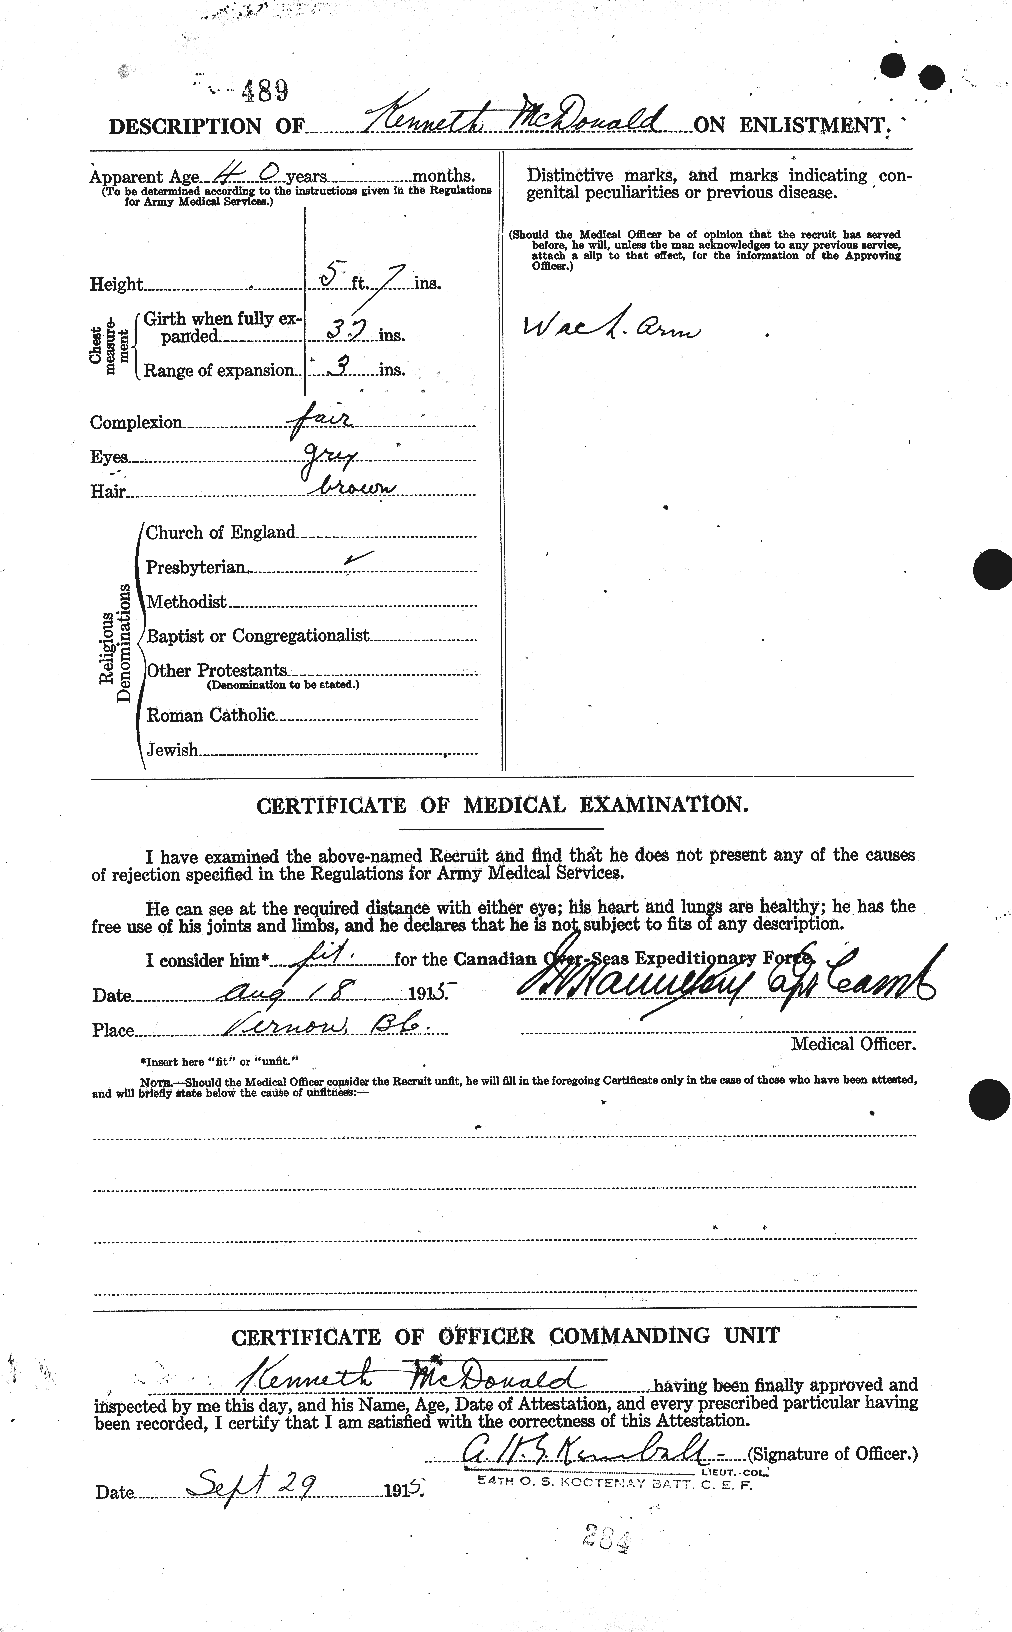 Personnel Records of the First World War - CEF 519713b